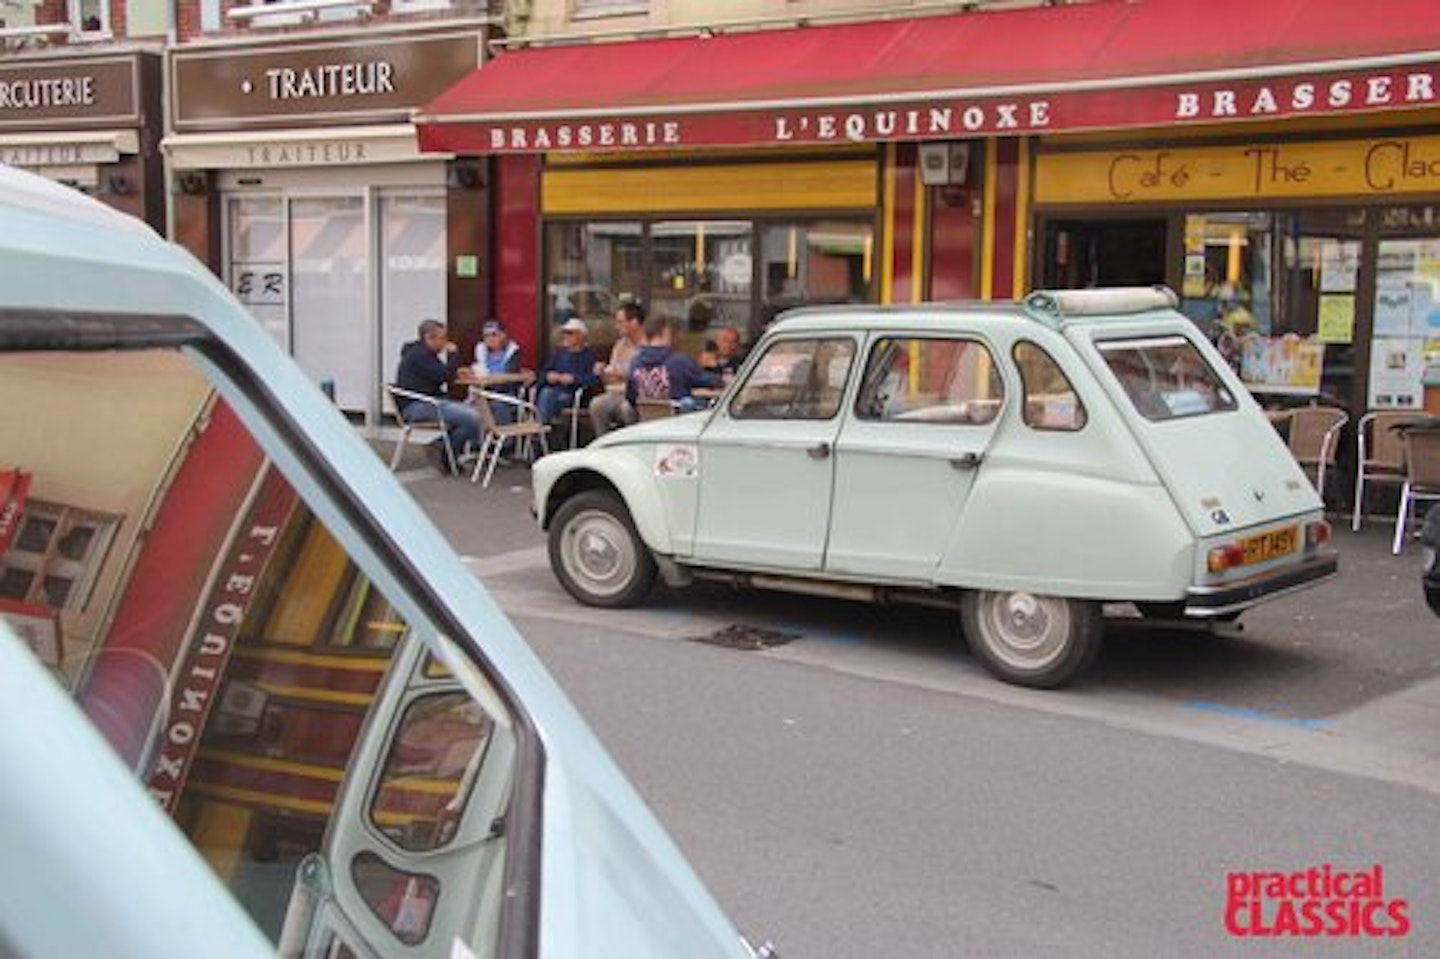 50 YEARS OF THE CITROËN DYANE